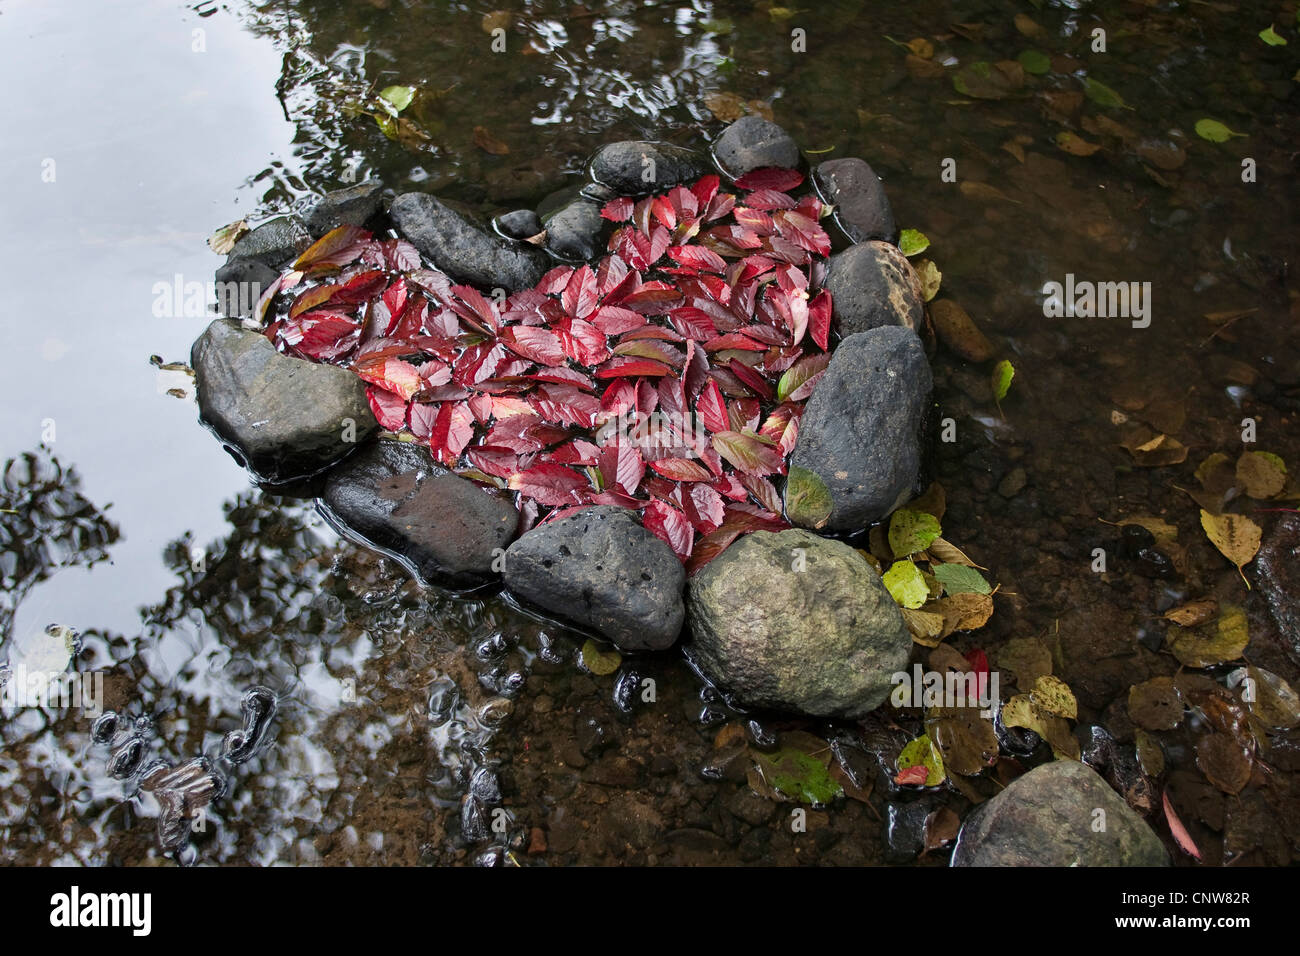 children have formed a heart with stones in a creek and filled it with red leaves, Germany Stock Photo